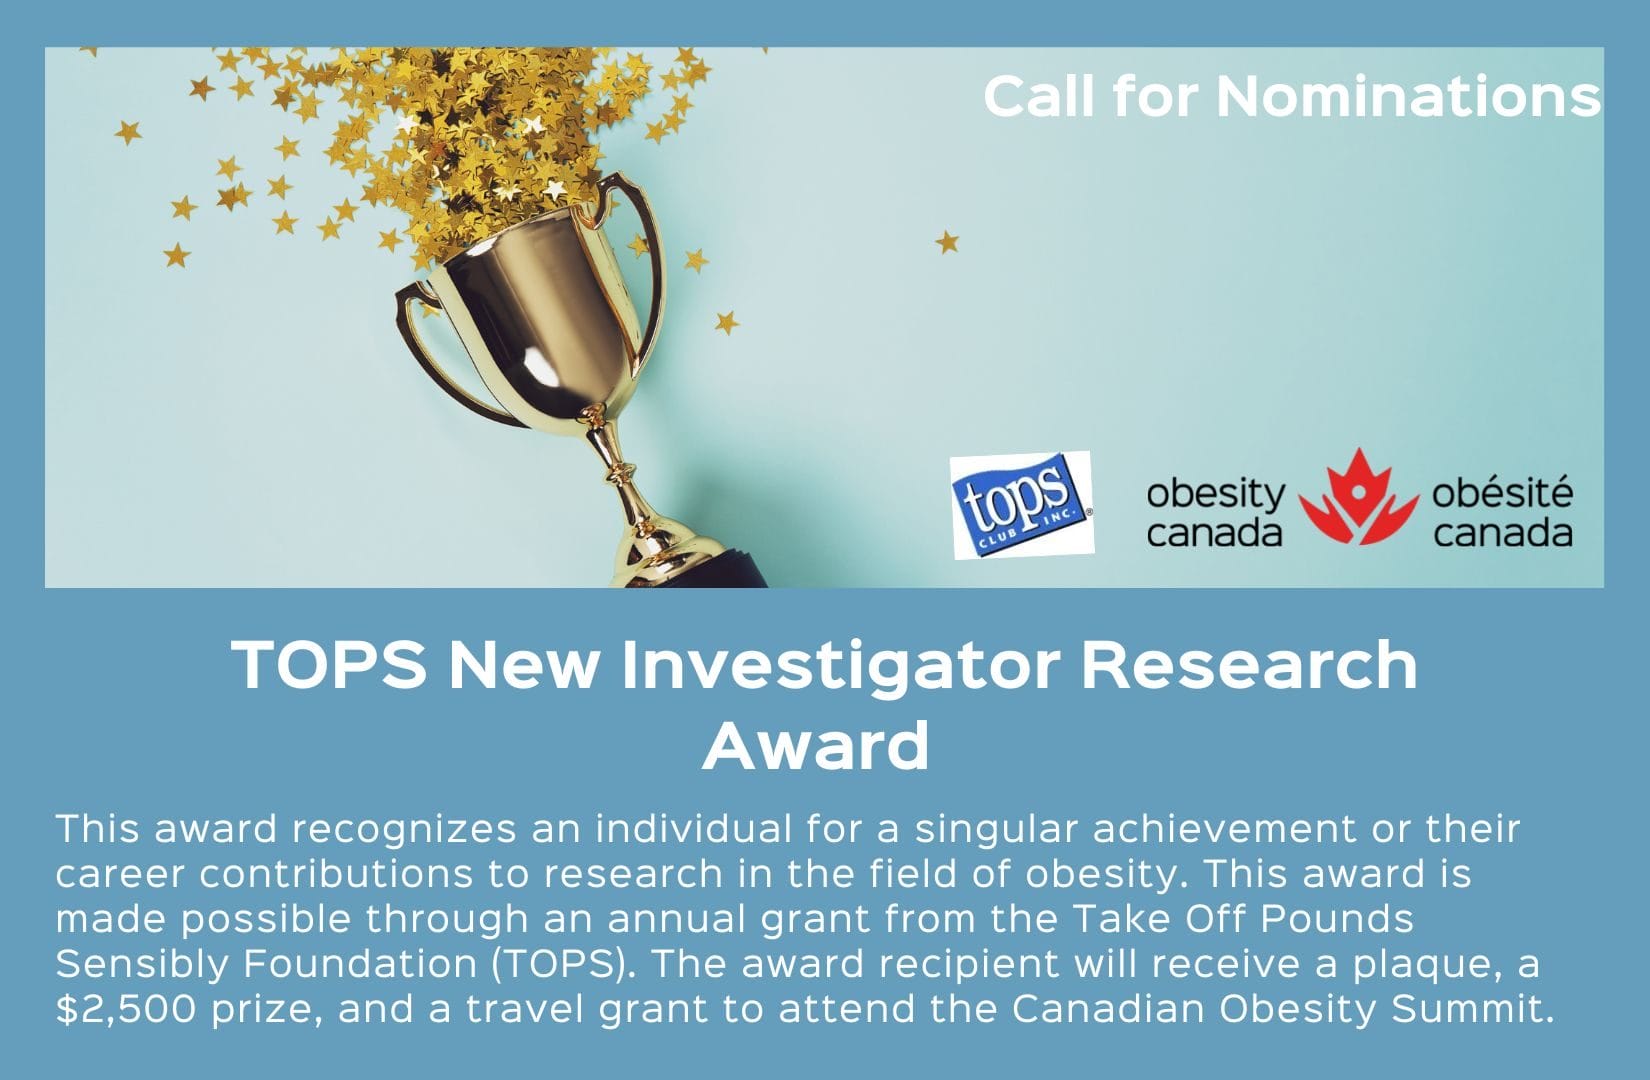 Graphic announcing the "tops new investigator research award" with a gold trophy, stars, and details of the award for contributions in obesity research.